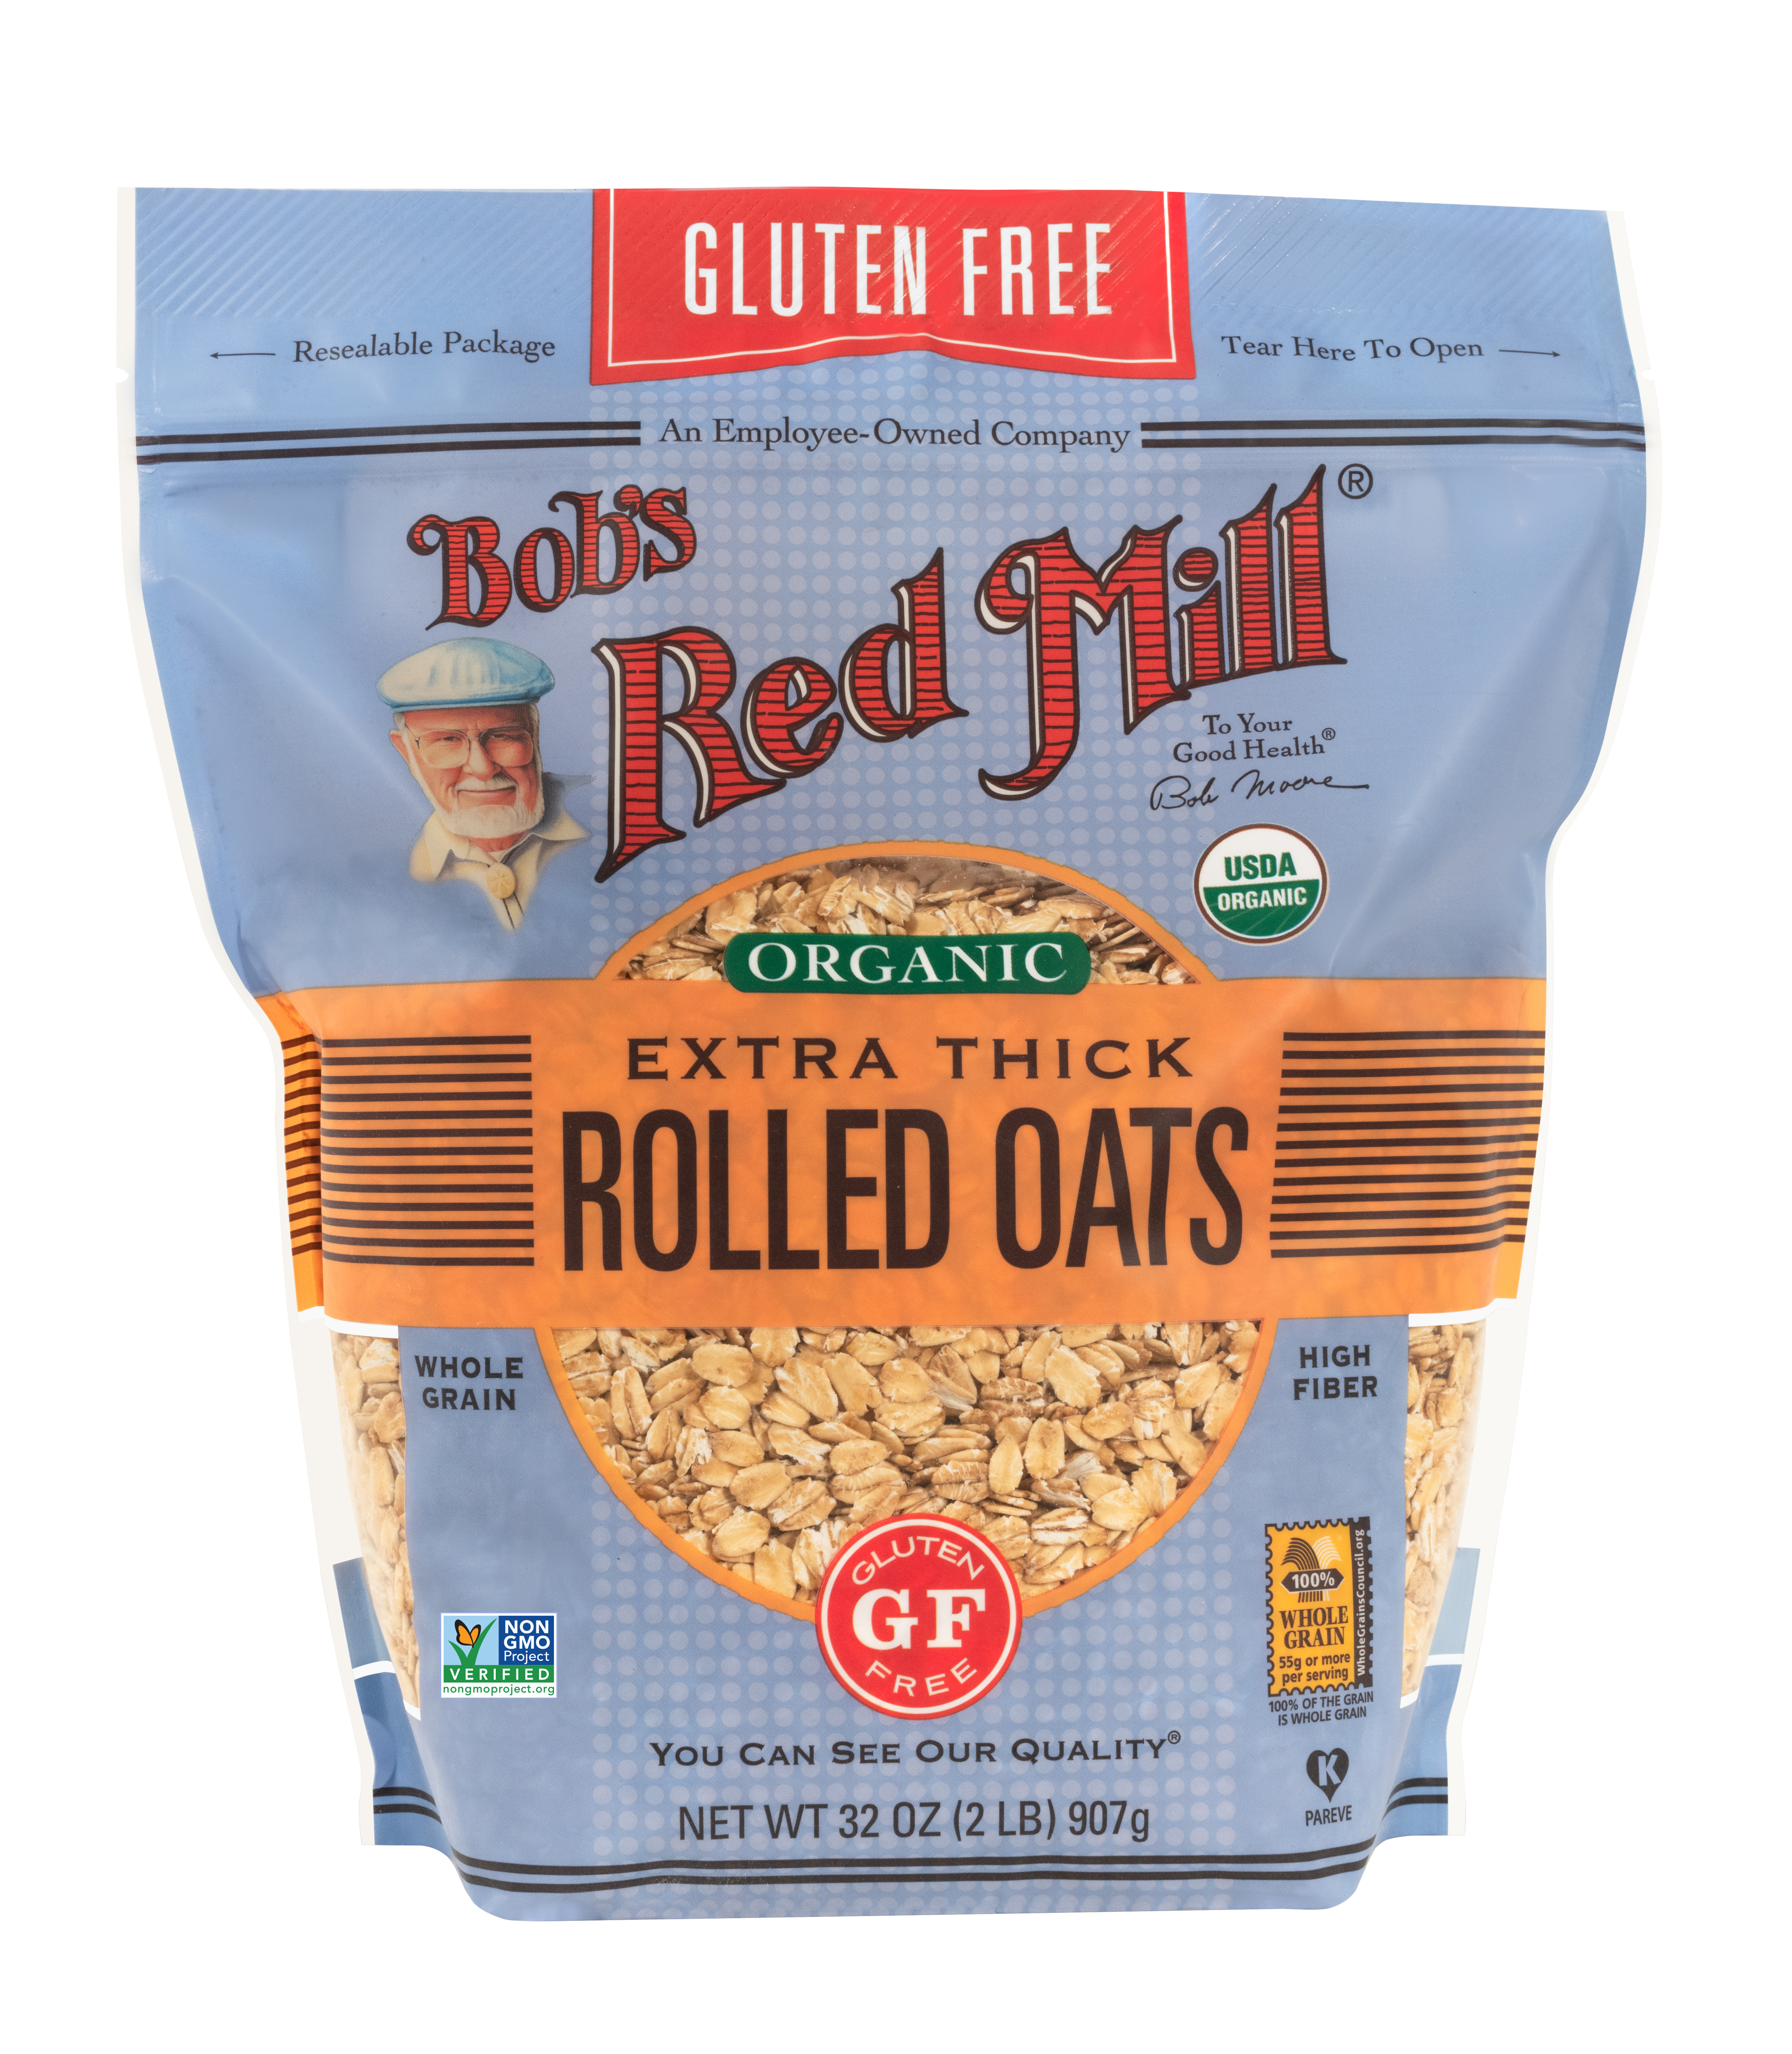 Gluten Free Organic Thick Rolled Oats- front